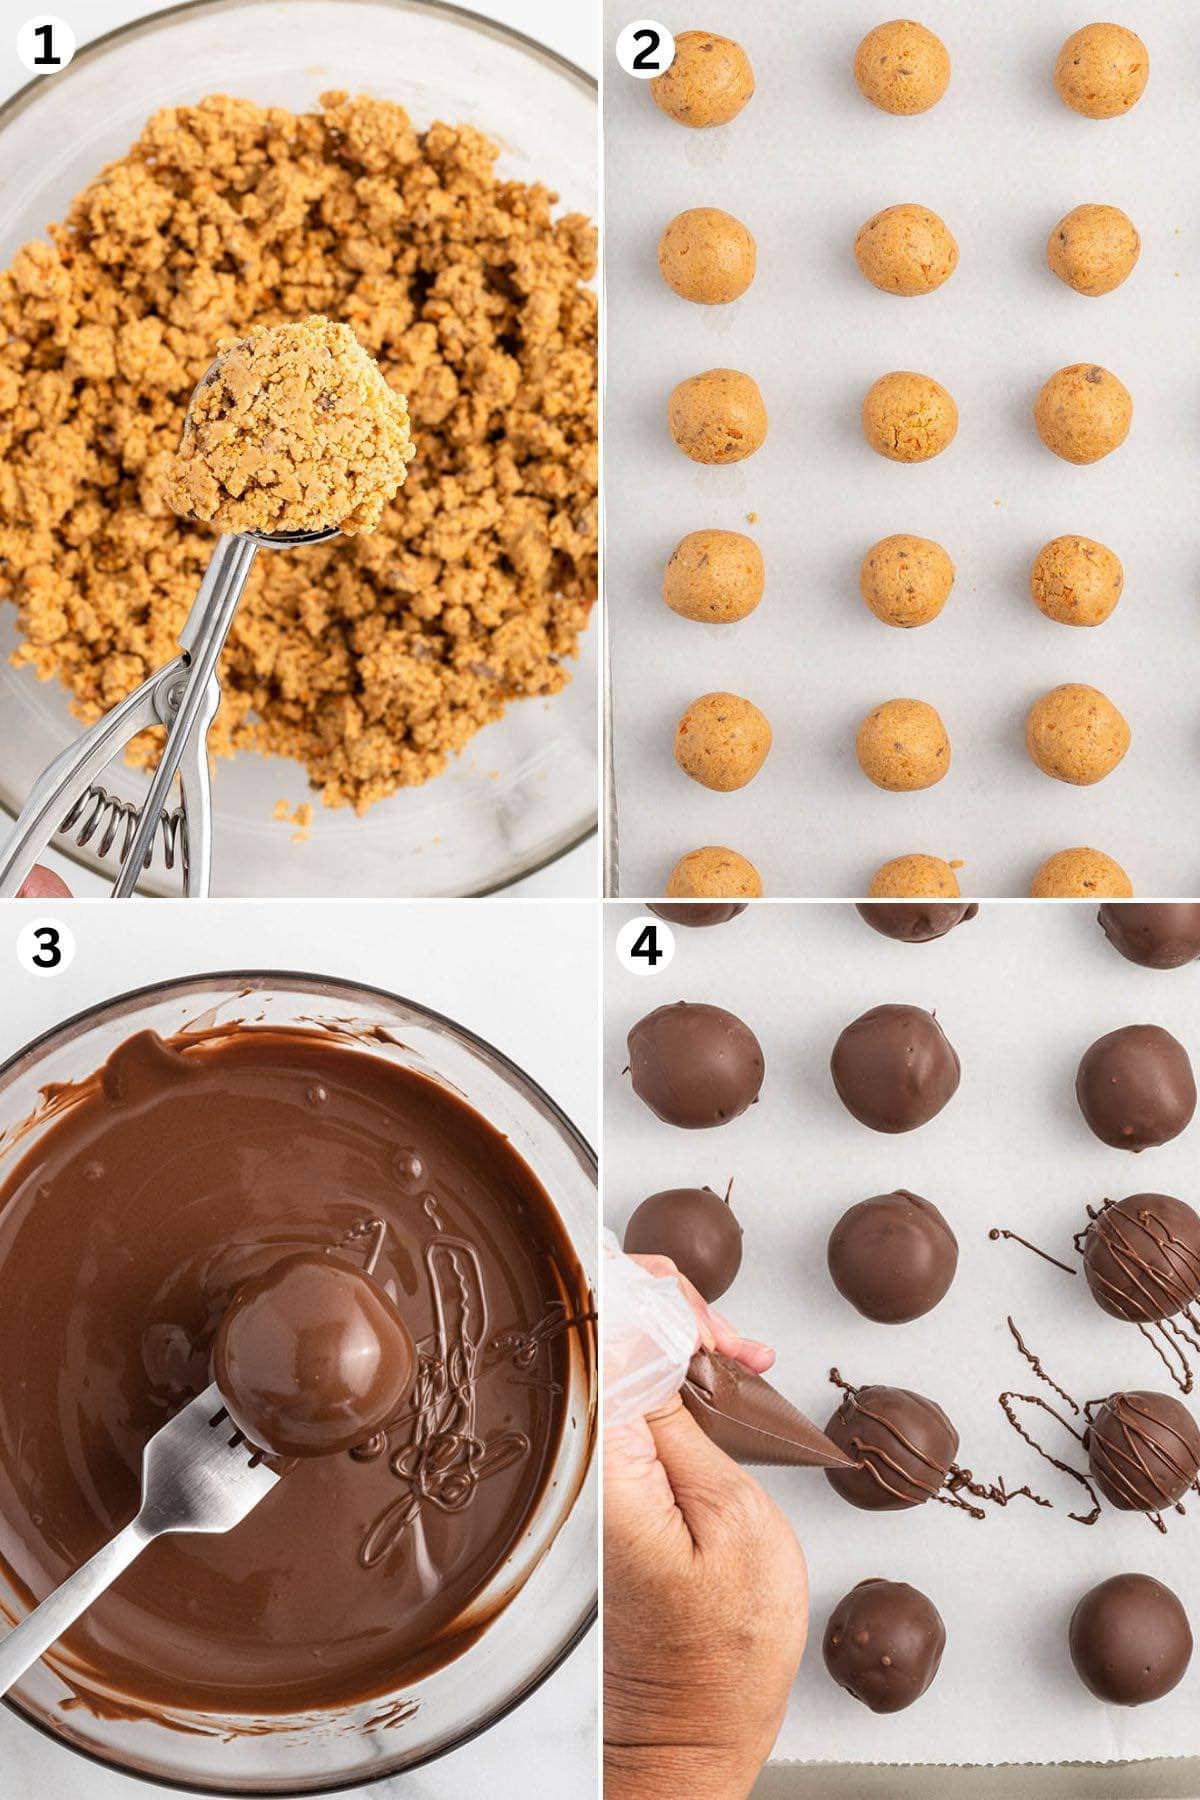 Mix balls ingredients in a large bowl. Scoop and roll the mixture into round balls. Coat the Butterfinger in  melted chocolate. Add chocolate drizzle to each balls.